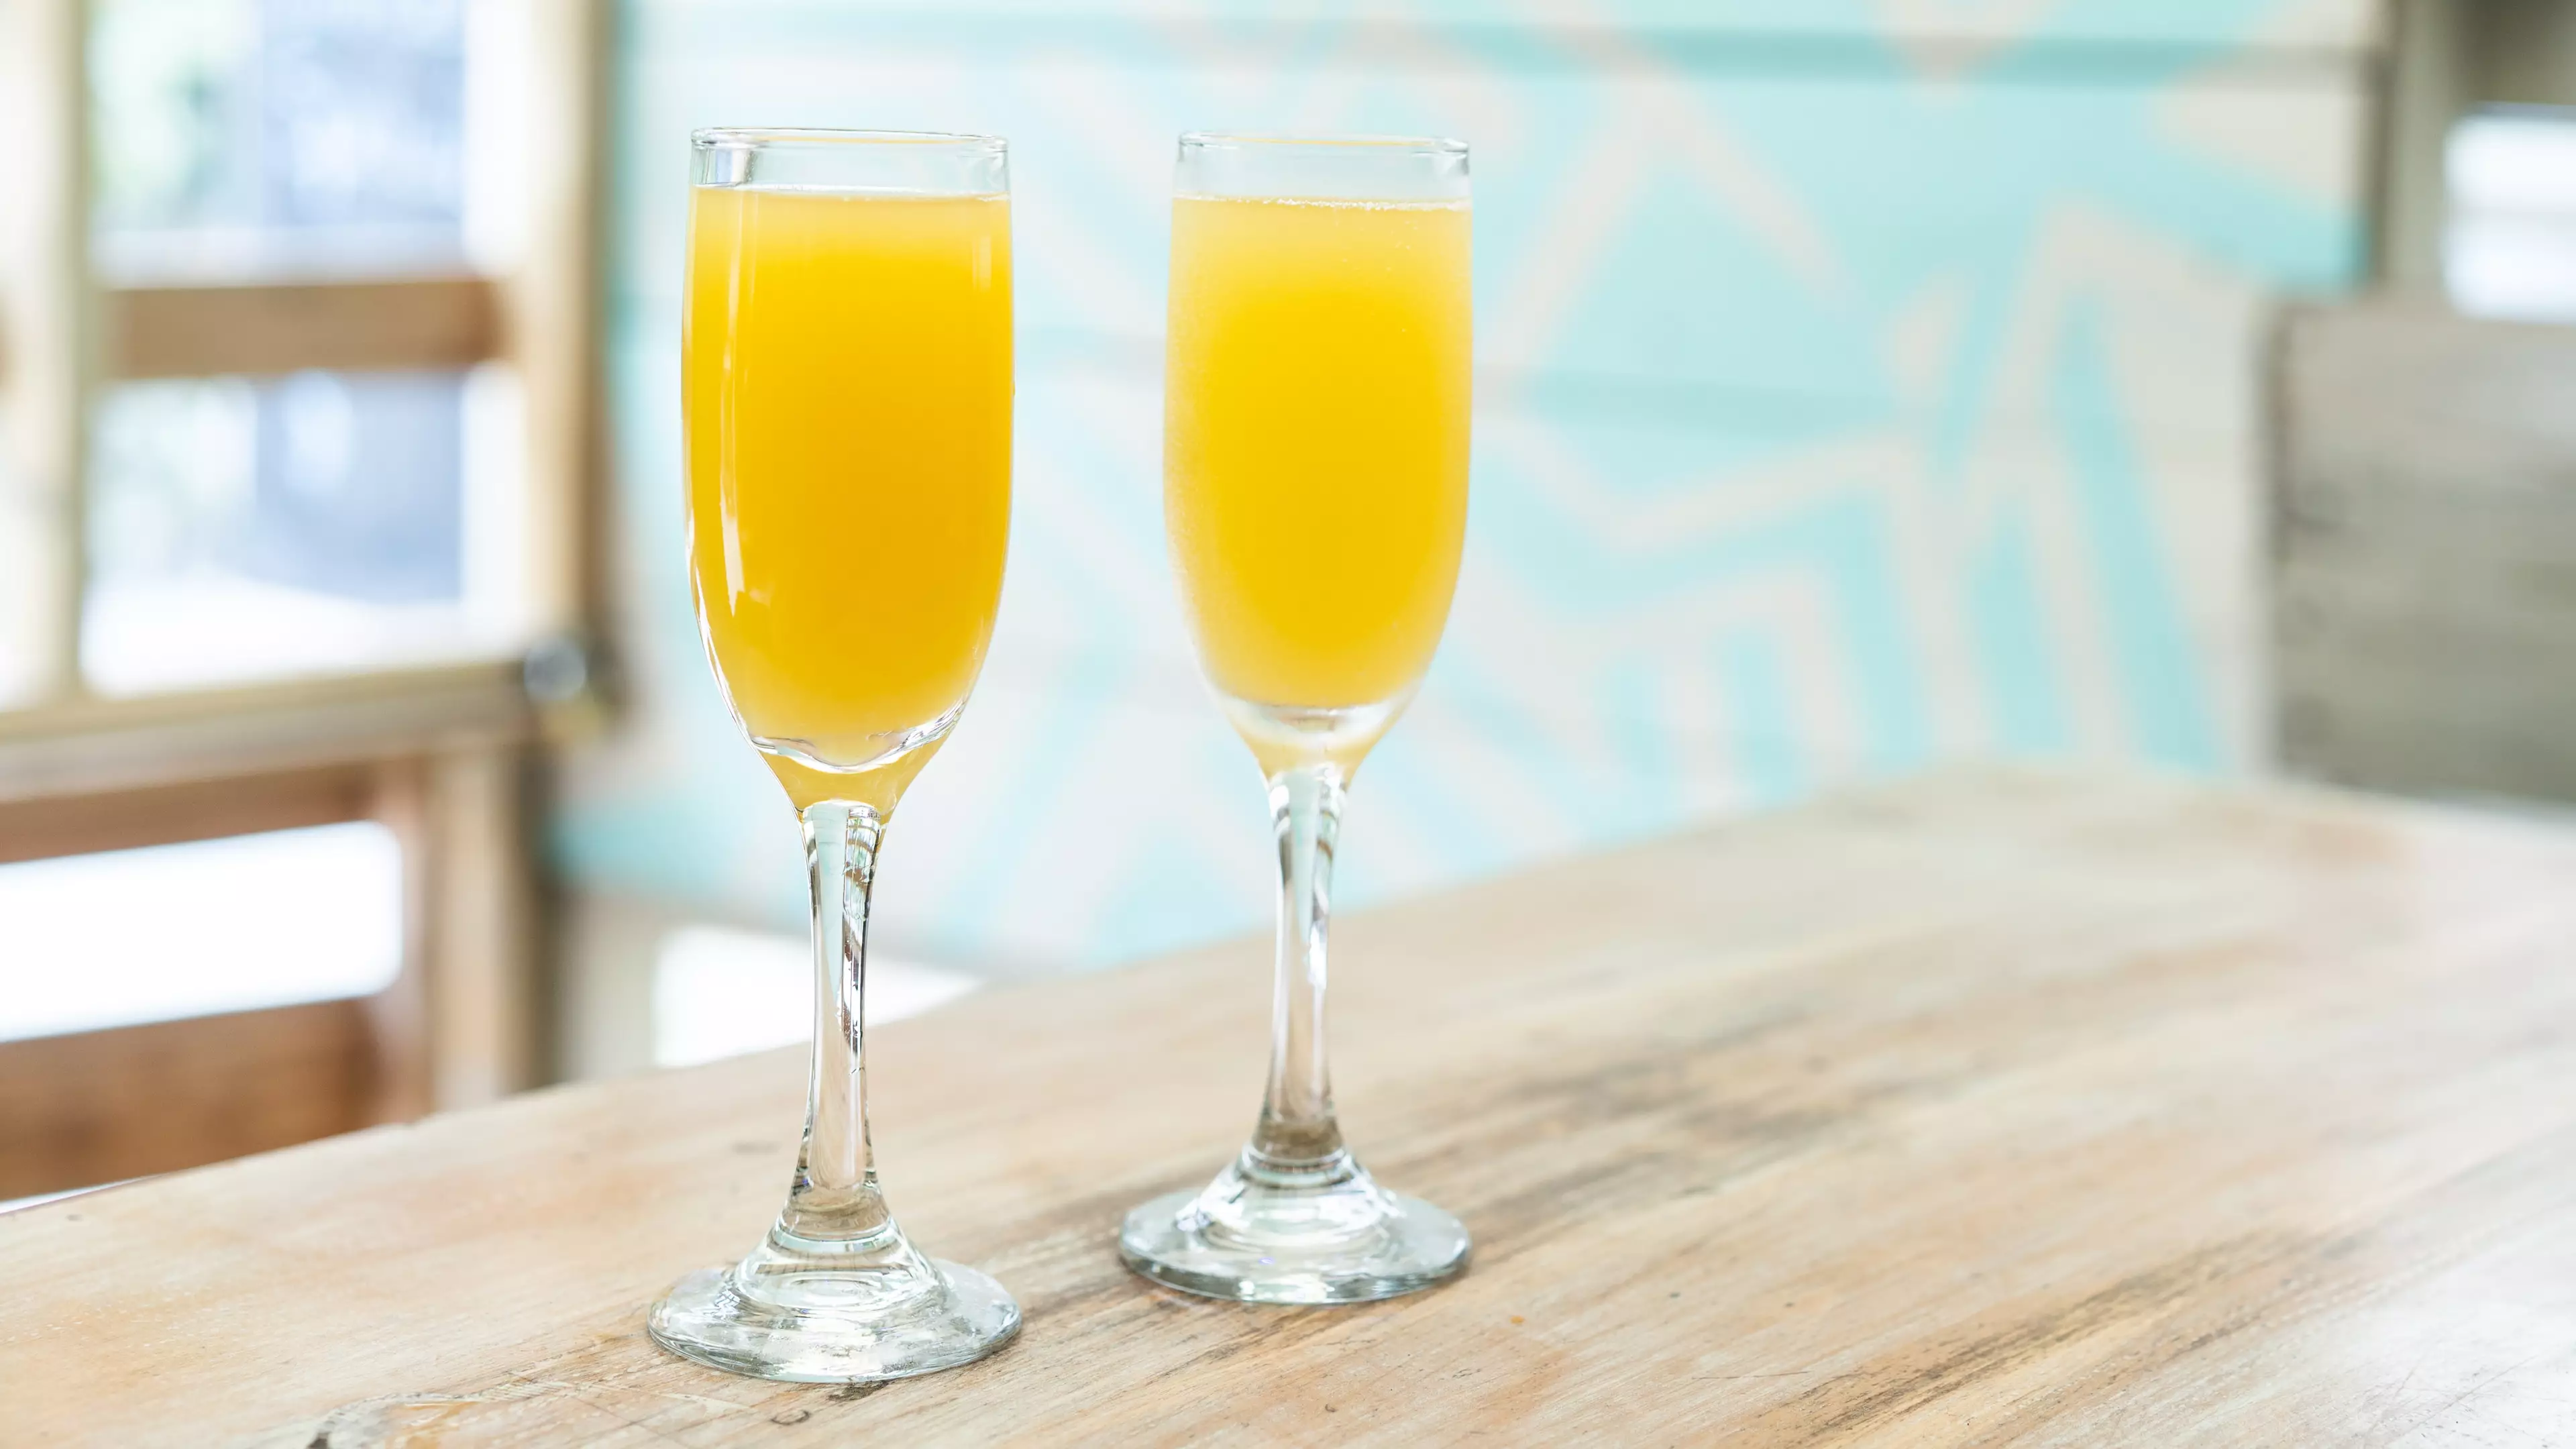 Being 'Buck's Fizz Drunk’ Is An Actual Thing, According To Experts